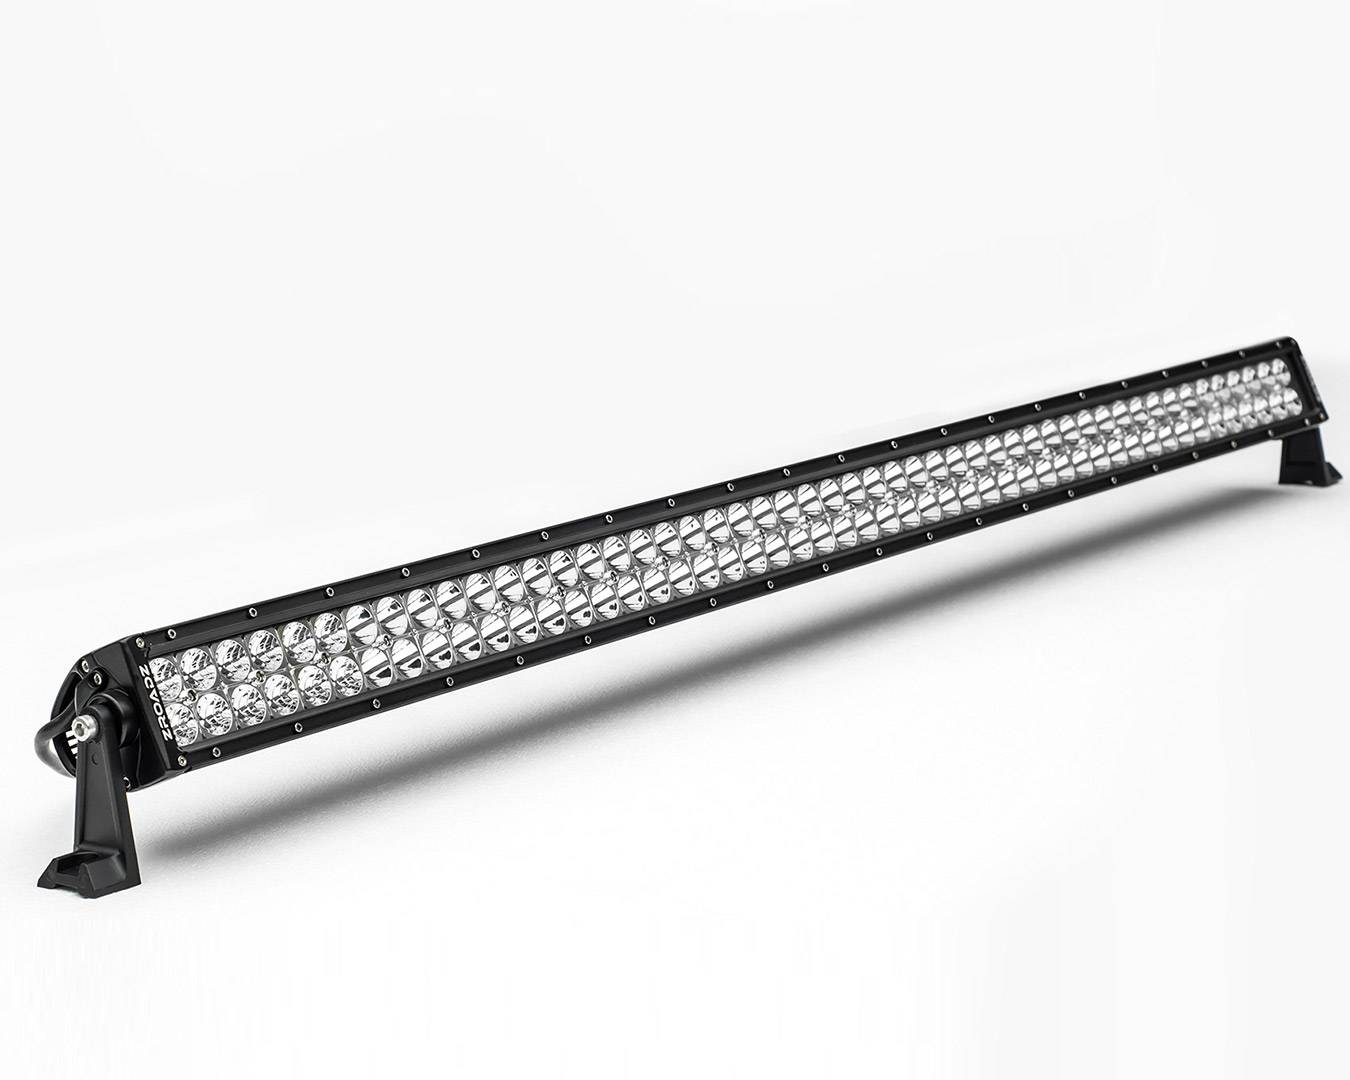 ZROADZ OFF ROAD PRODUCTS - 52 Inch LED Straight Double Row Light Bar - Part # Z30BC14W300